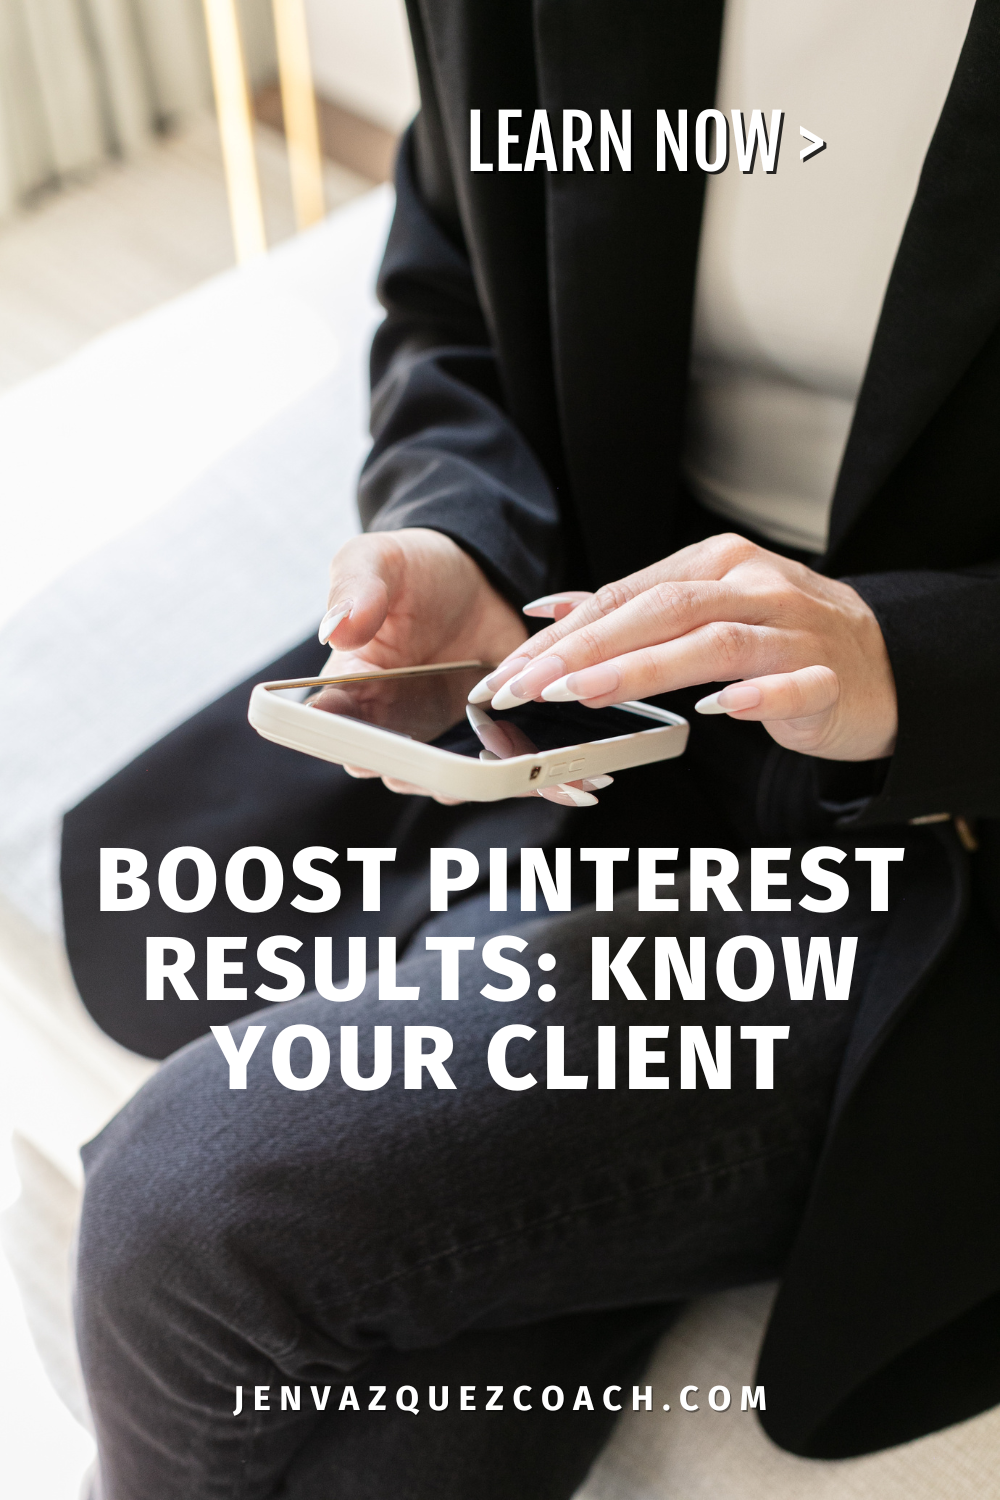 Women in a black pantsuit scrolling on a screen colored cell phone and create sweater under suit jacket.  Boost Pinterest Results: Kow Your Ideal Client